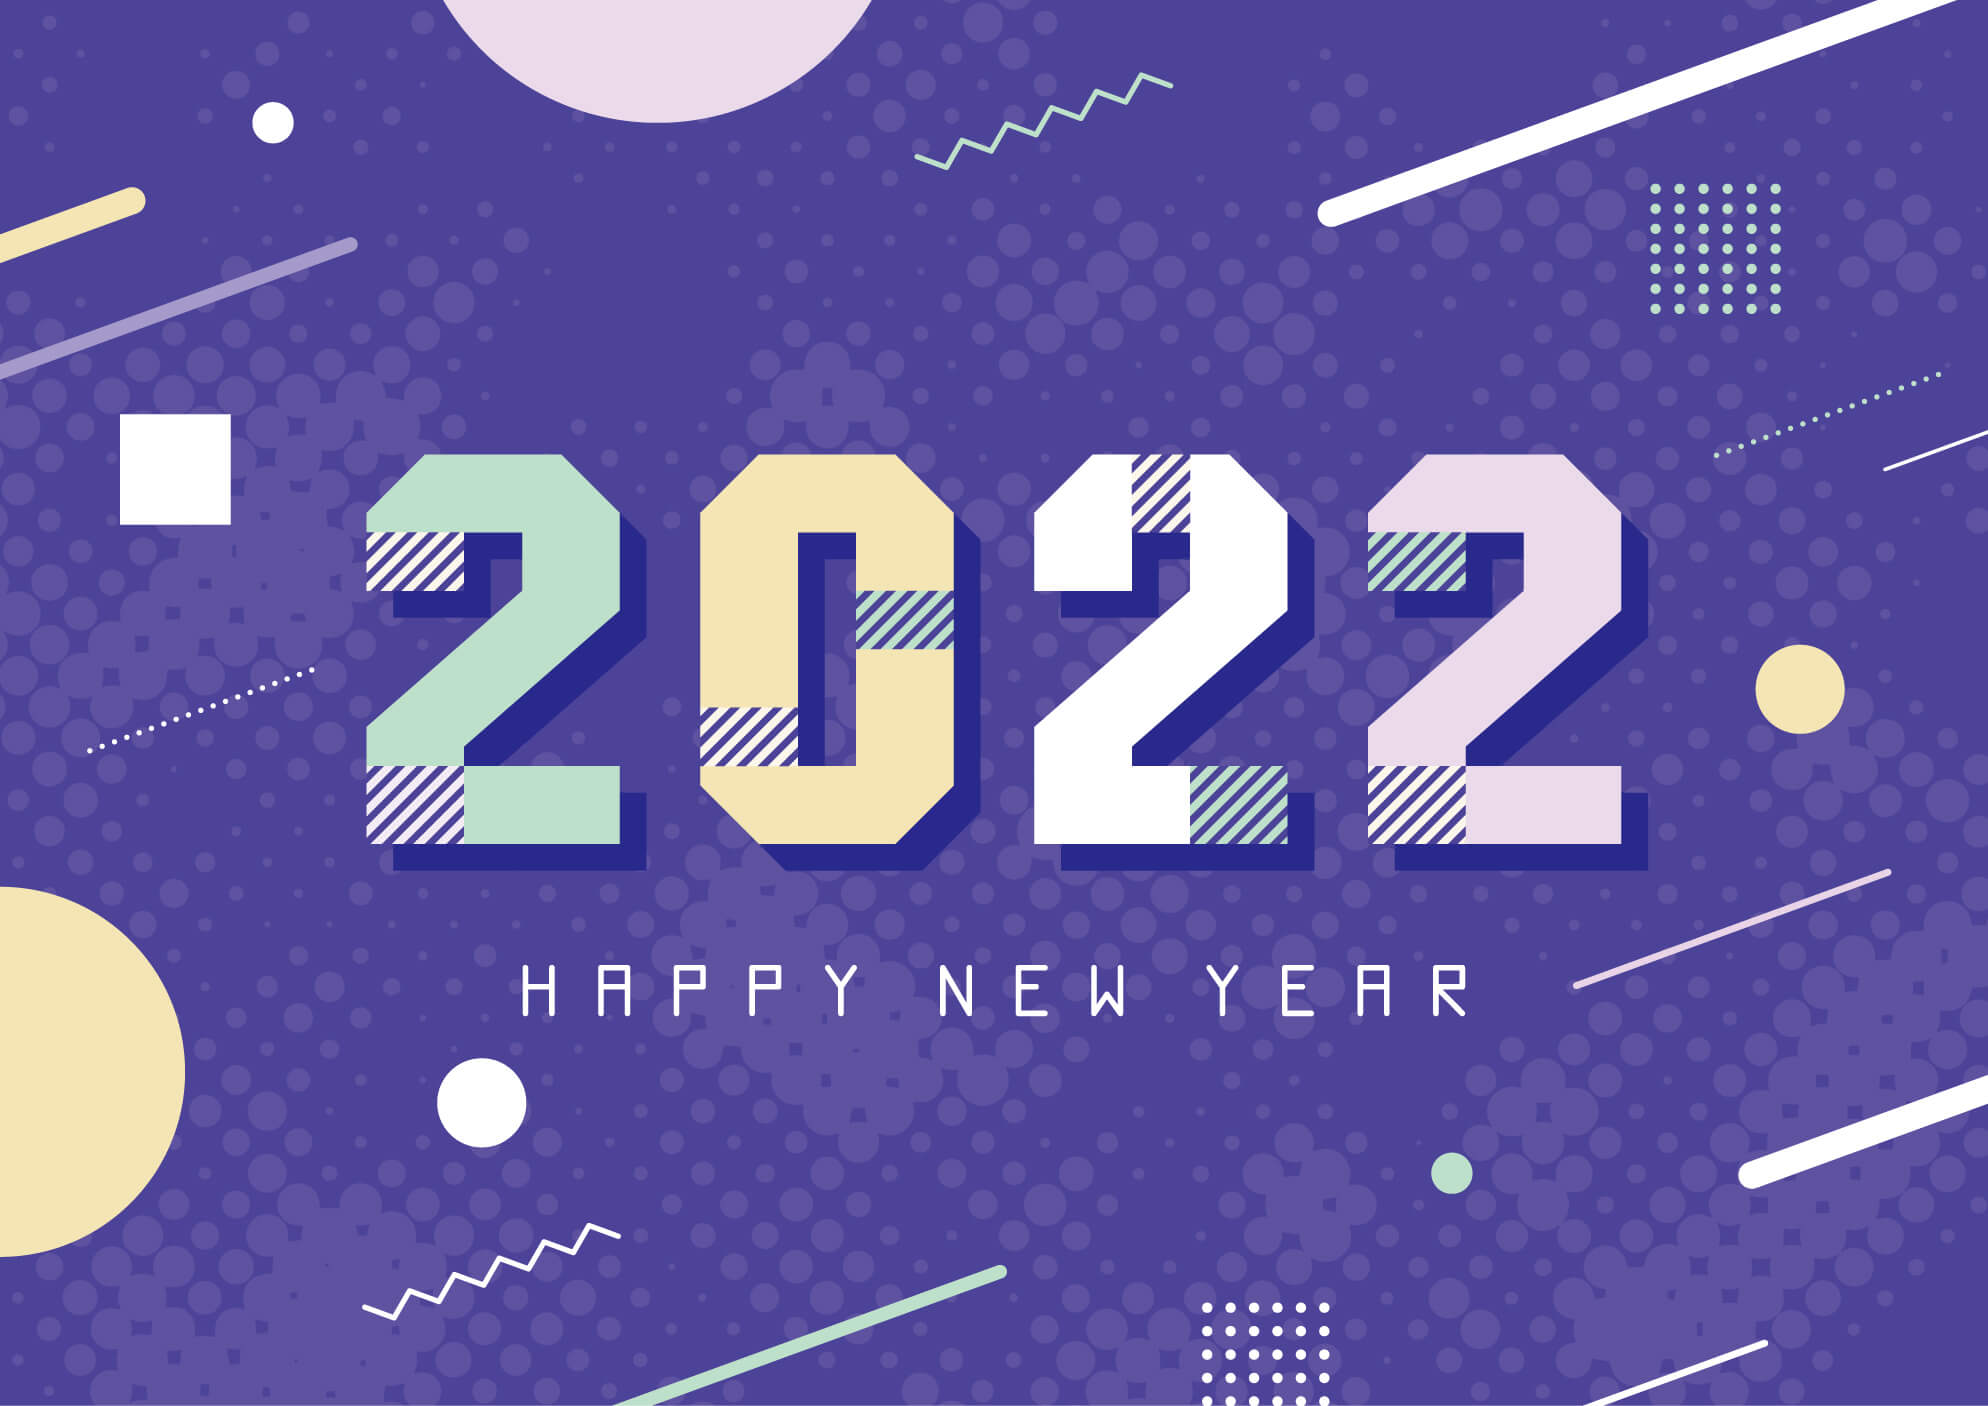 2022 New Year Cards: 10 Great Ideas to Ring the Upcoming Year